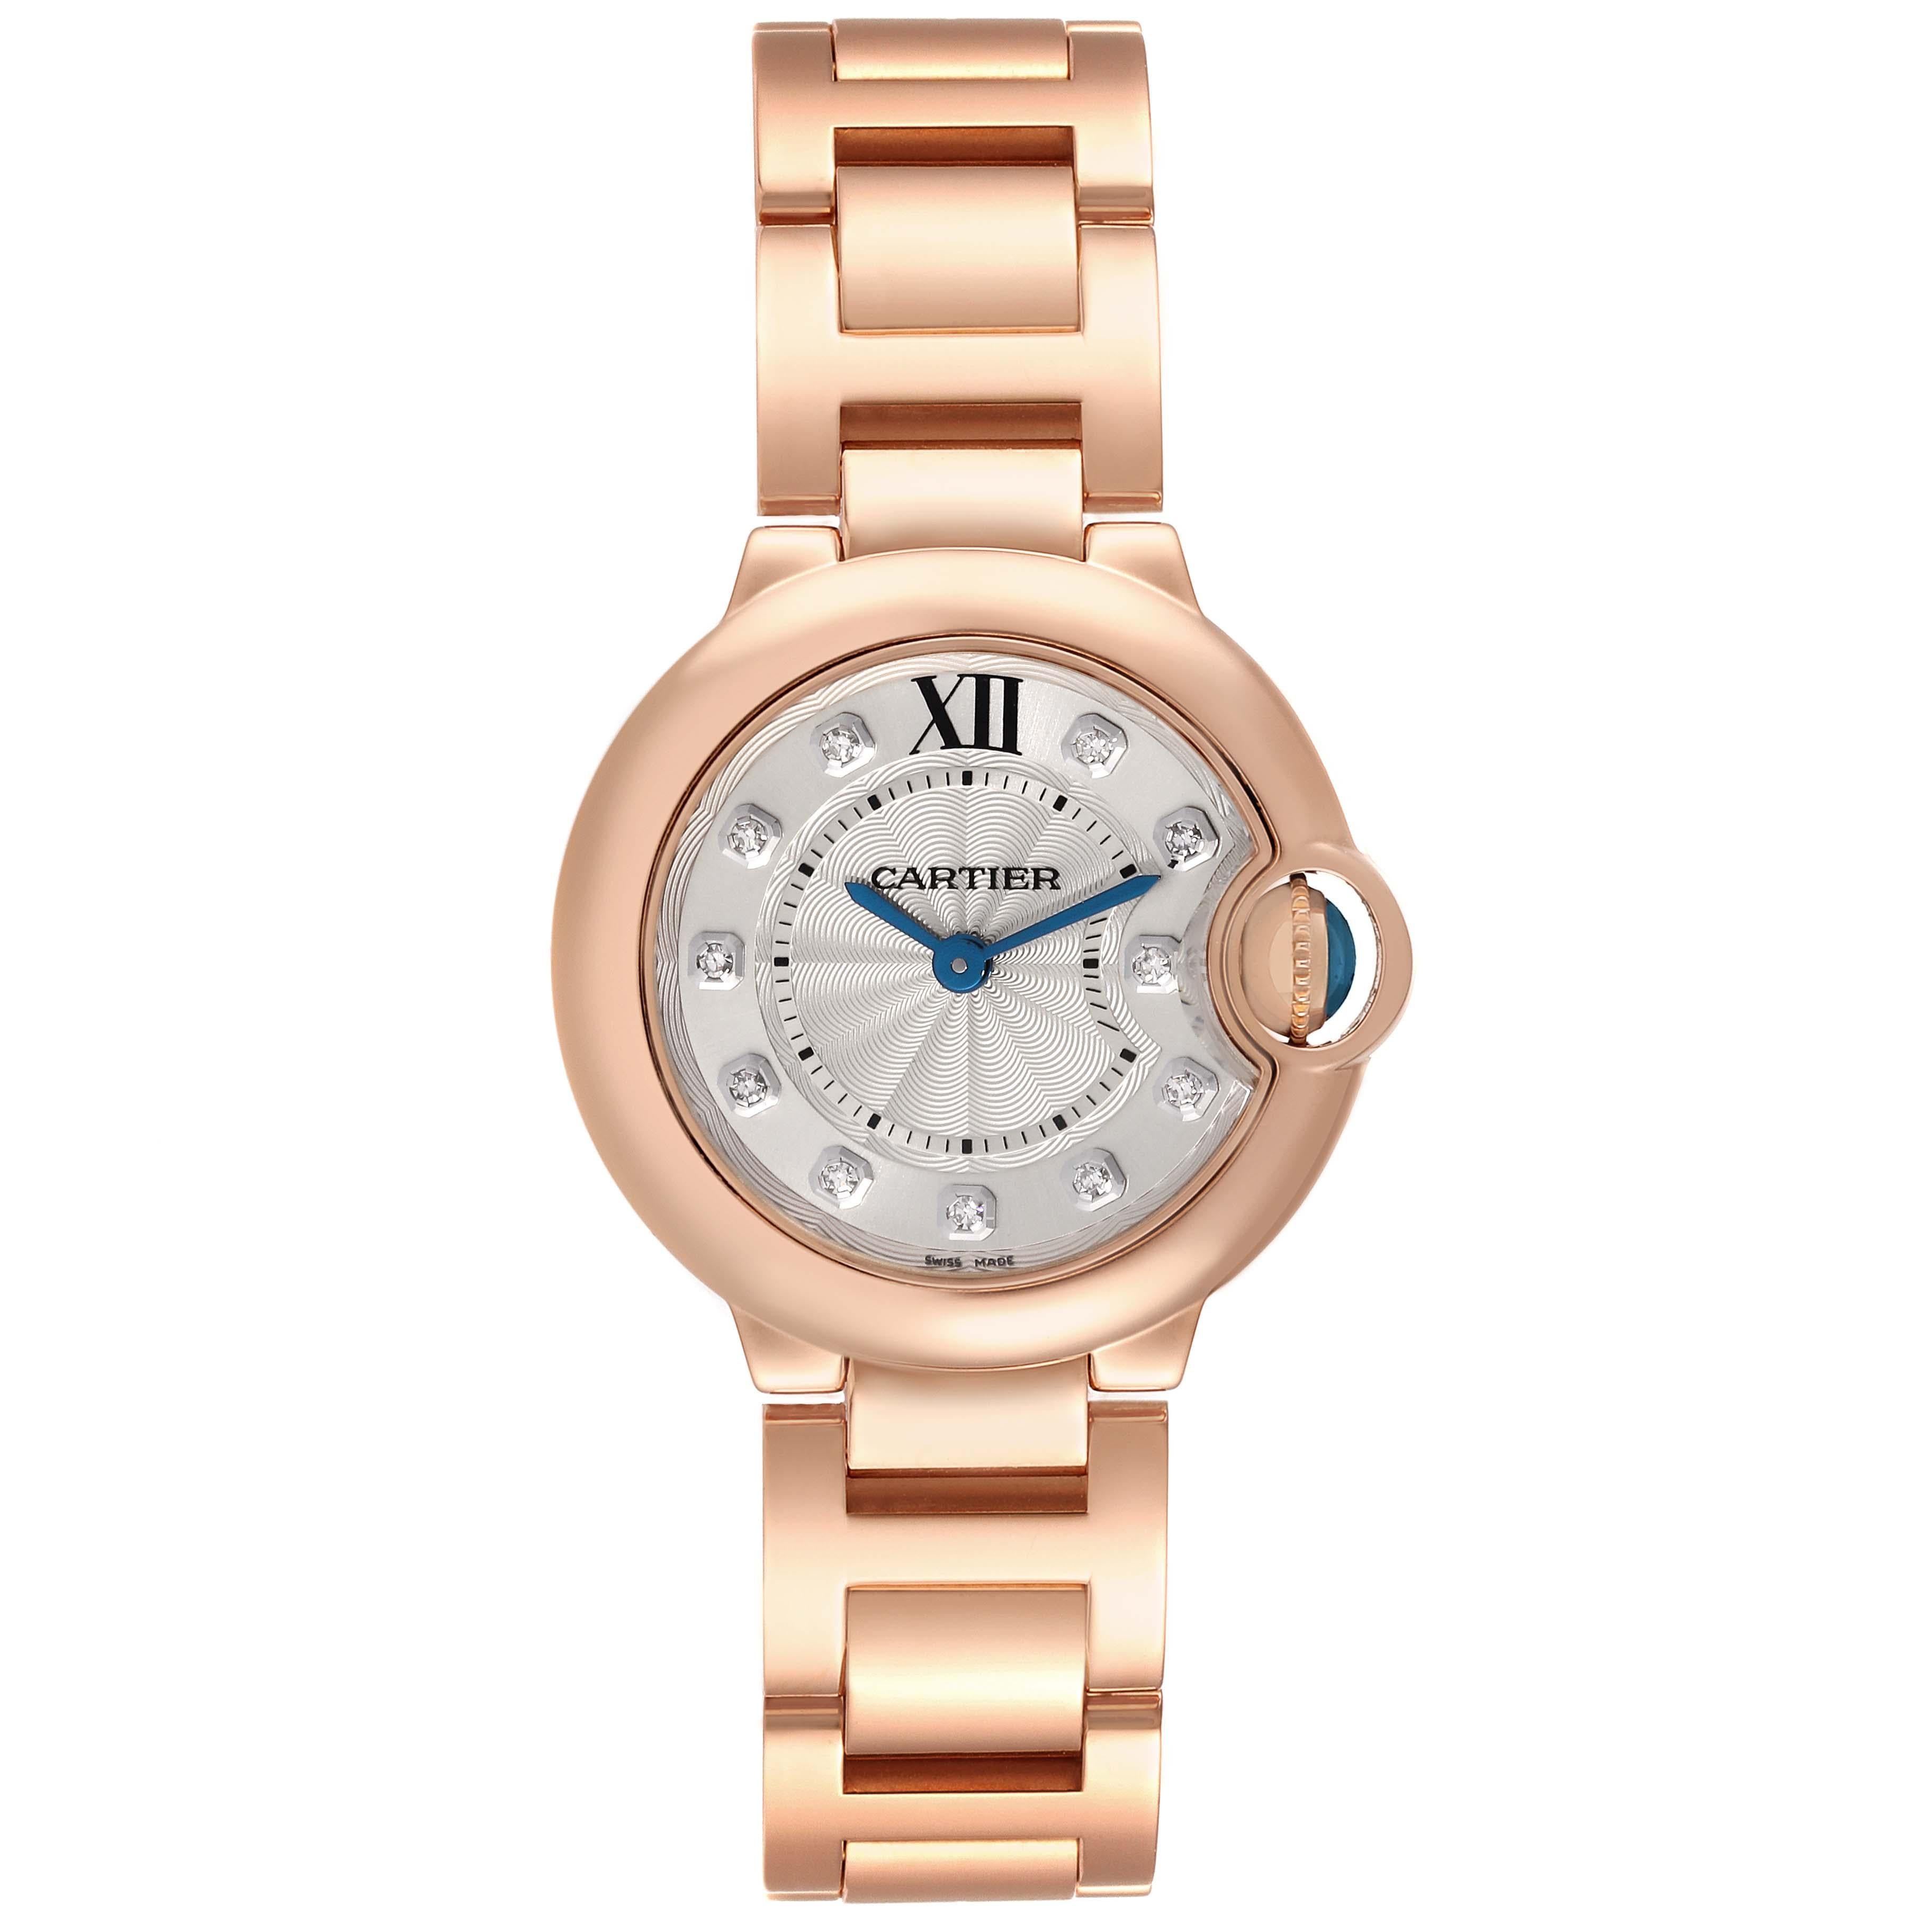 Cartier Ballon Bleu 28mm Rose Gold Diamond Dial Ladies Watch WE902025. Quartz movement. Round 18k rose gold case 28.0 mm in diameter. Fluted crown set with the blue sapphire cabochon. 18k rose gold smooth bezel. Scratch resistant sapphire crystal.